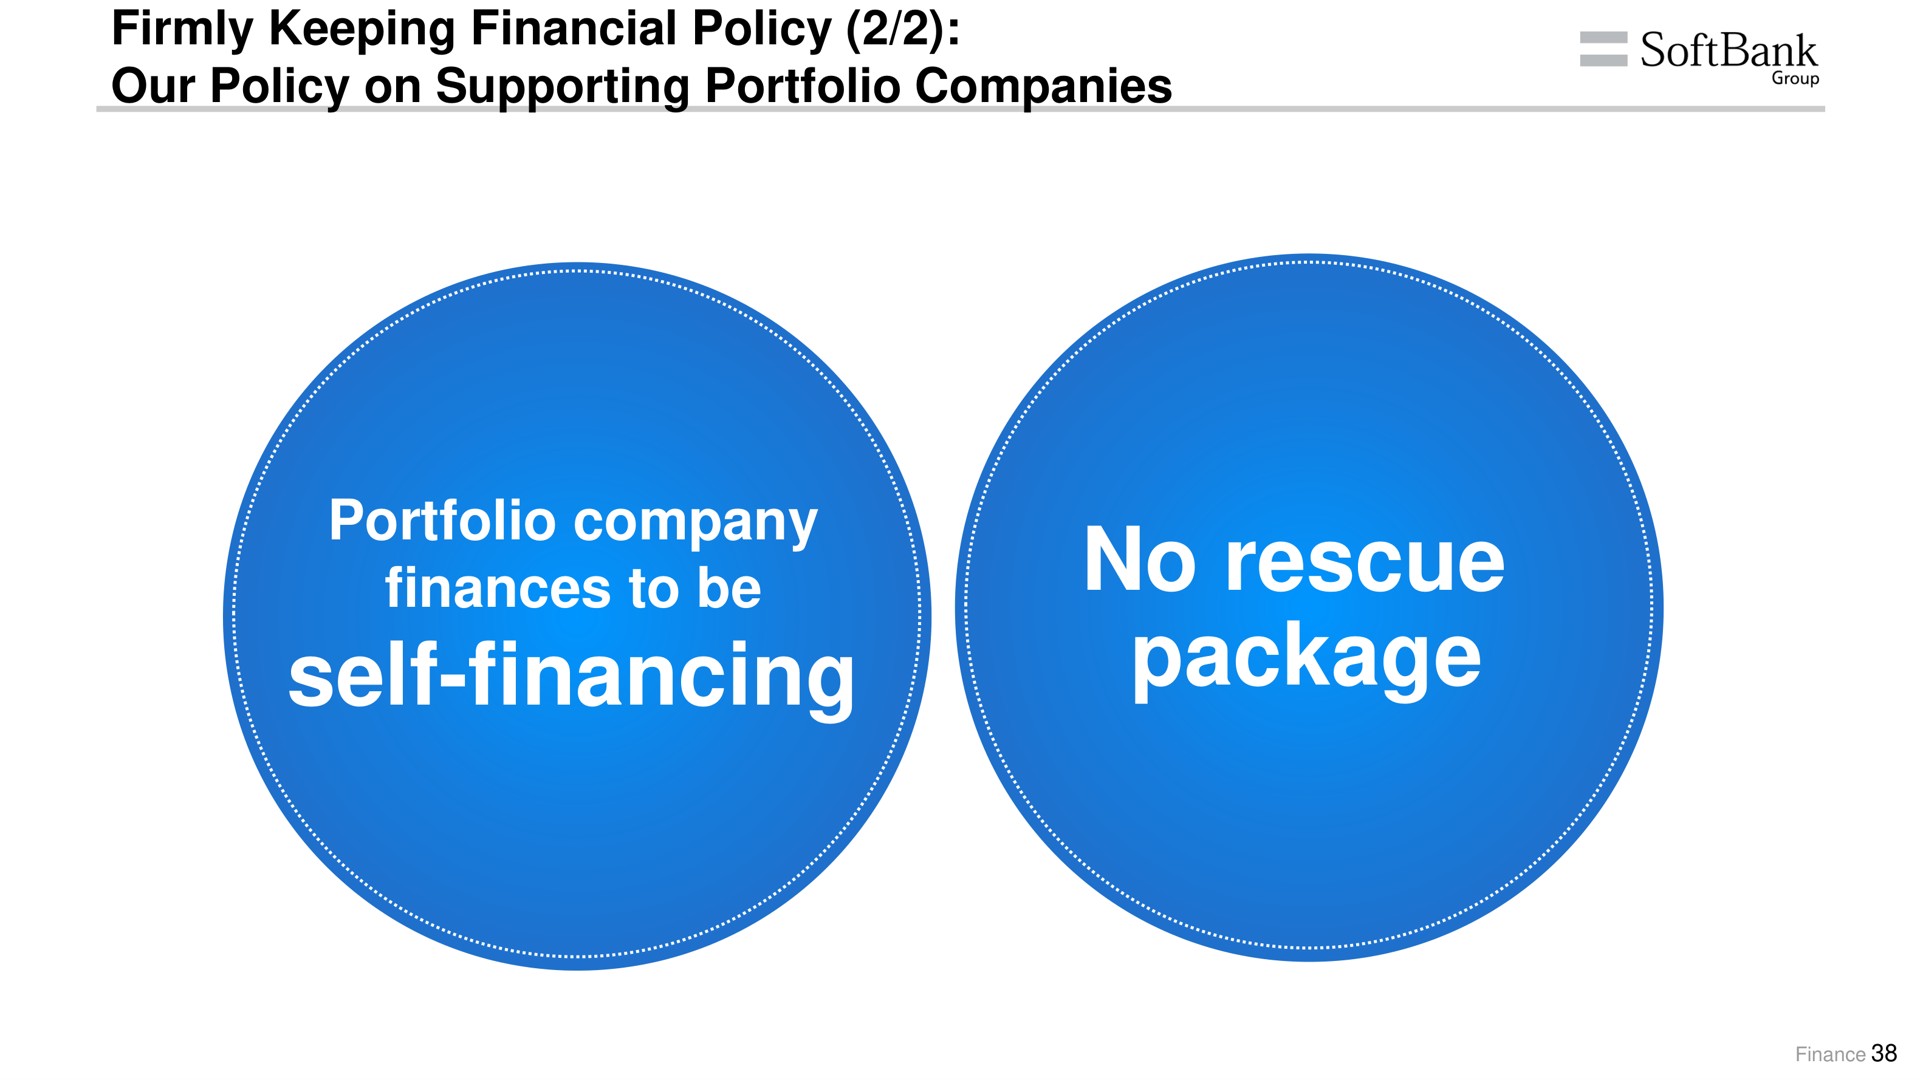 firmly keeping financial policy our policy on supporting portfolio companies portfolio company finances to be self financing no rescue package aril | SoftBank